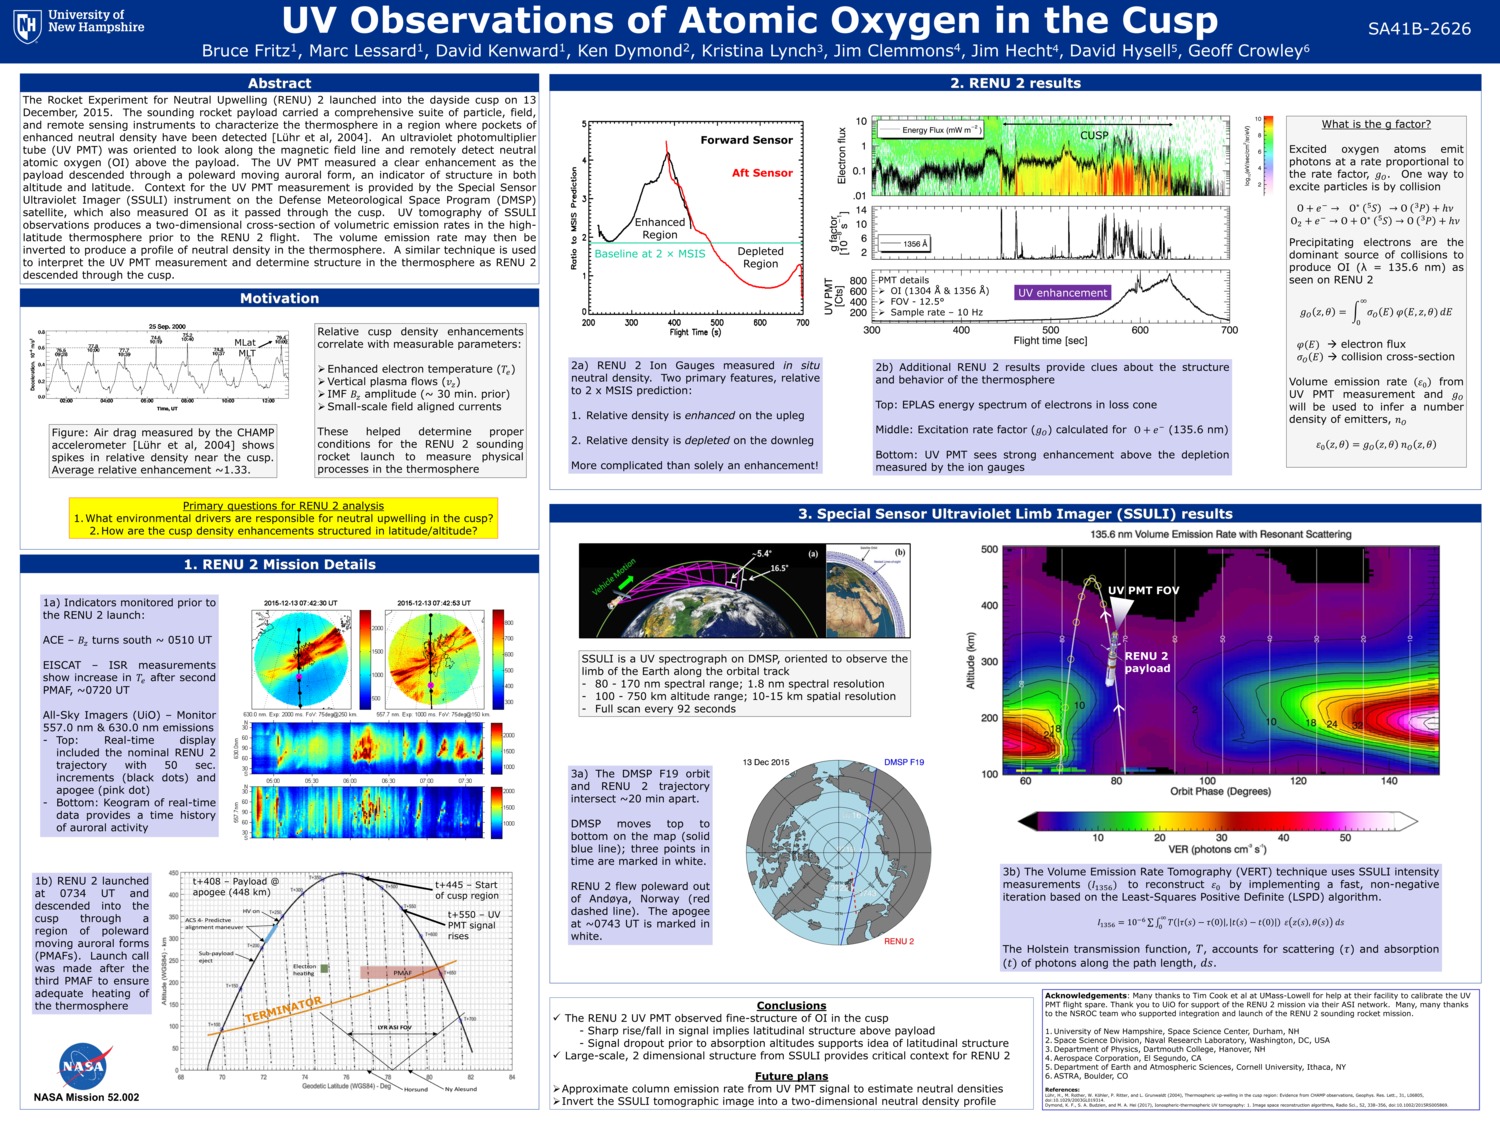 Uv Observations Of Atomic Oxygen In The Cusp by bfritz